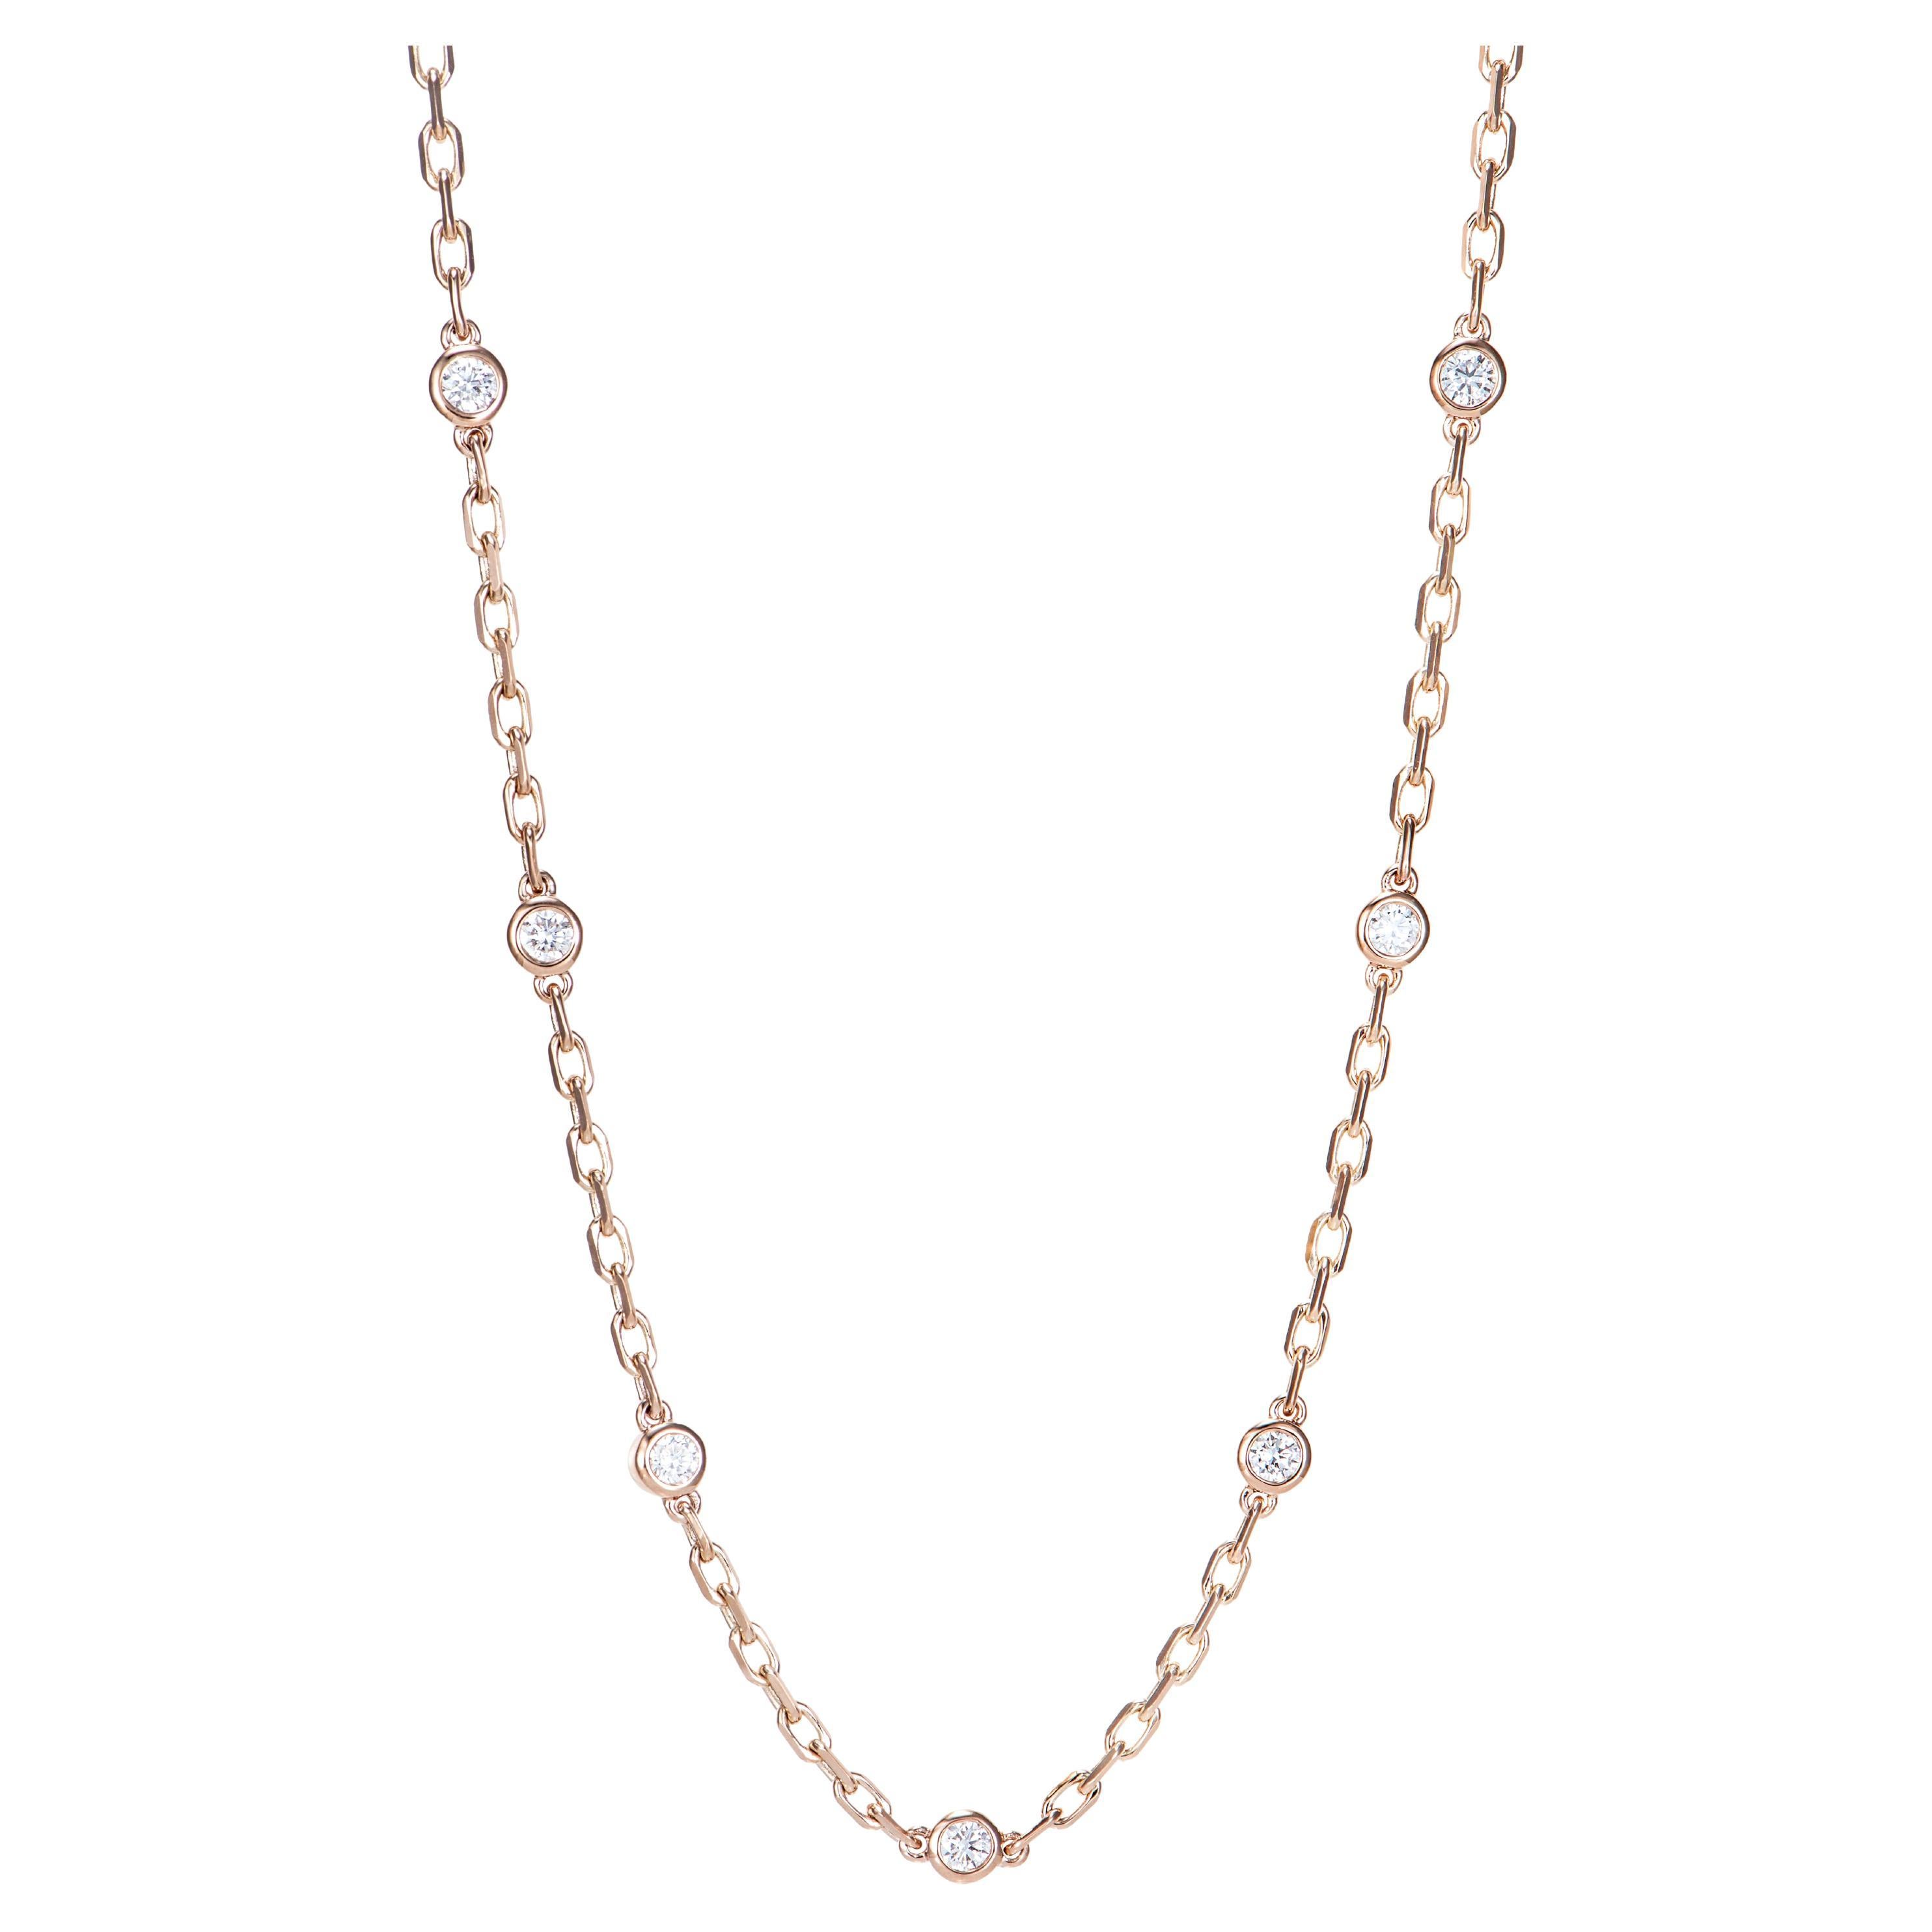 1.66 Carat Diamond Chain Necklace in 18 Karat Rose Gold. For Sale